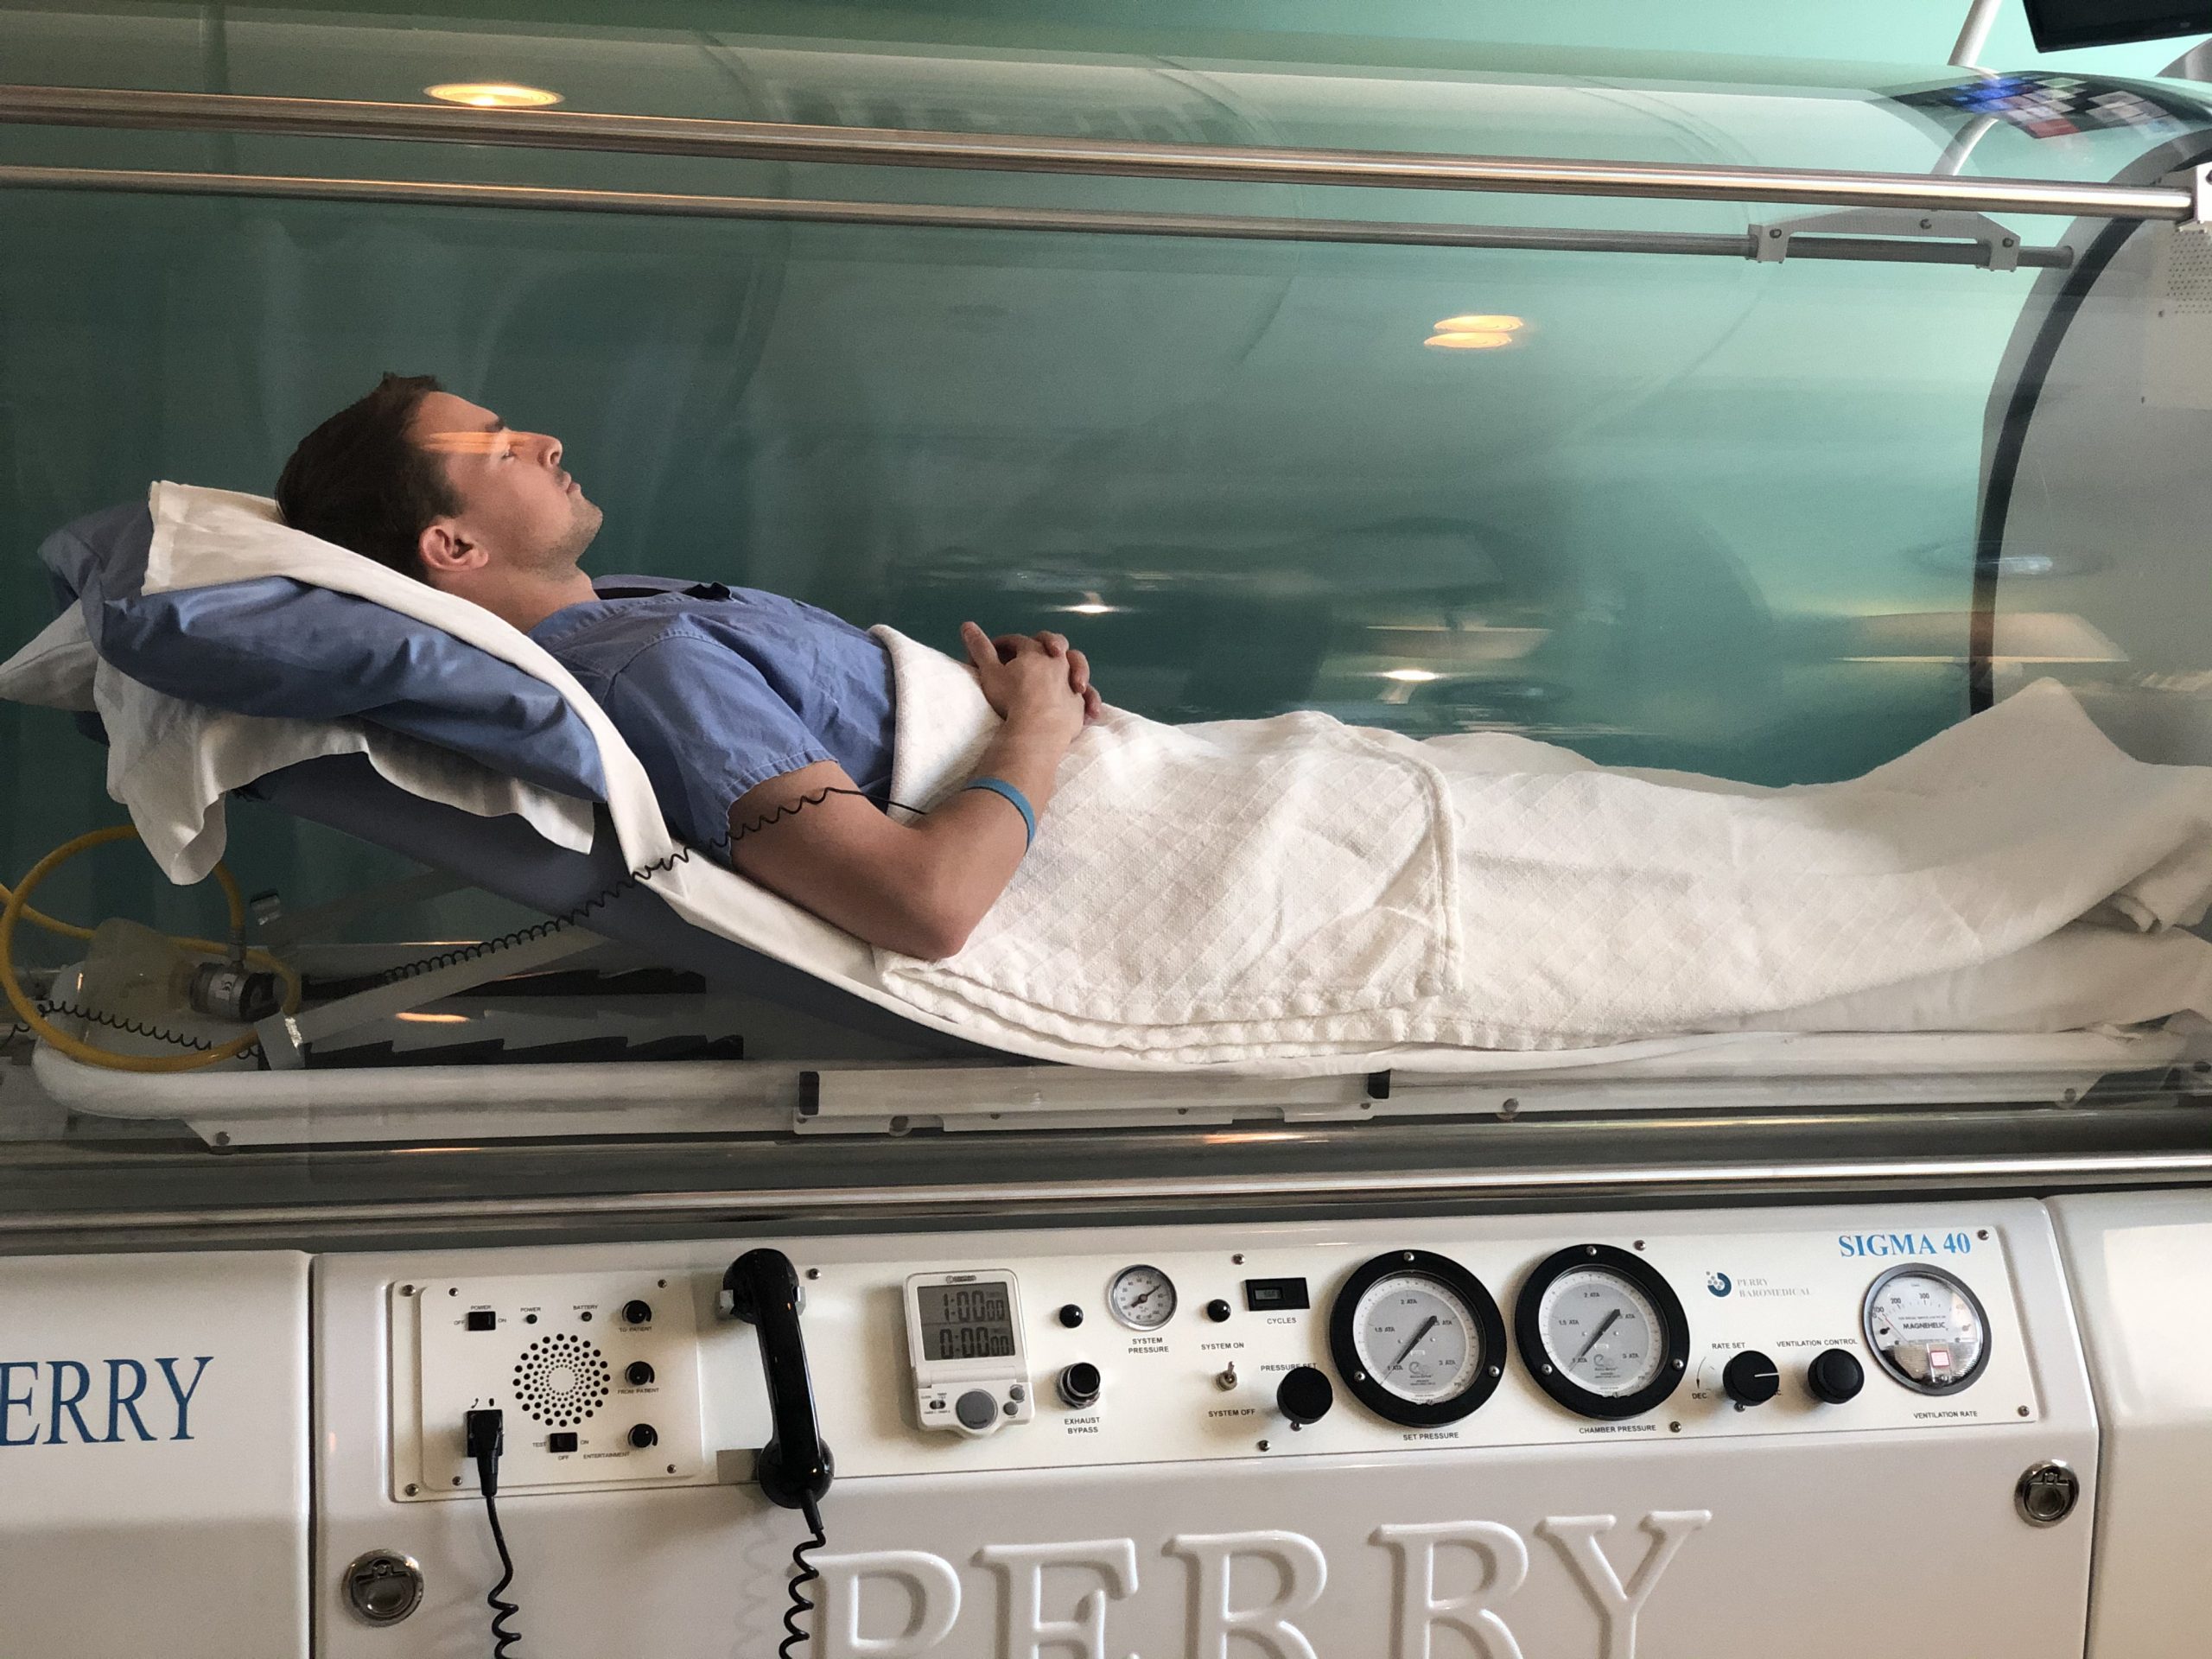 Does Hyperbaric Oxygen Therapy Help Bone Healing?